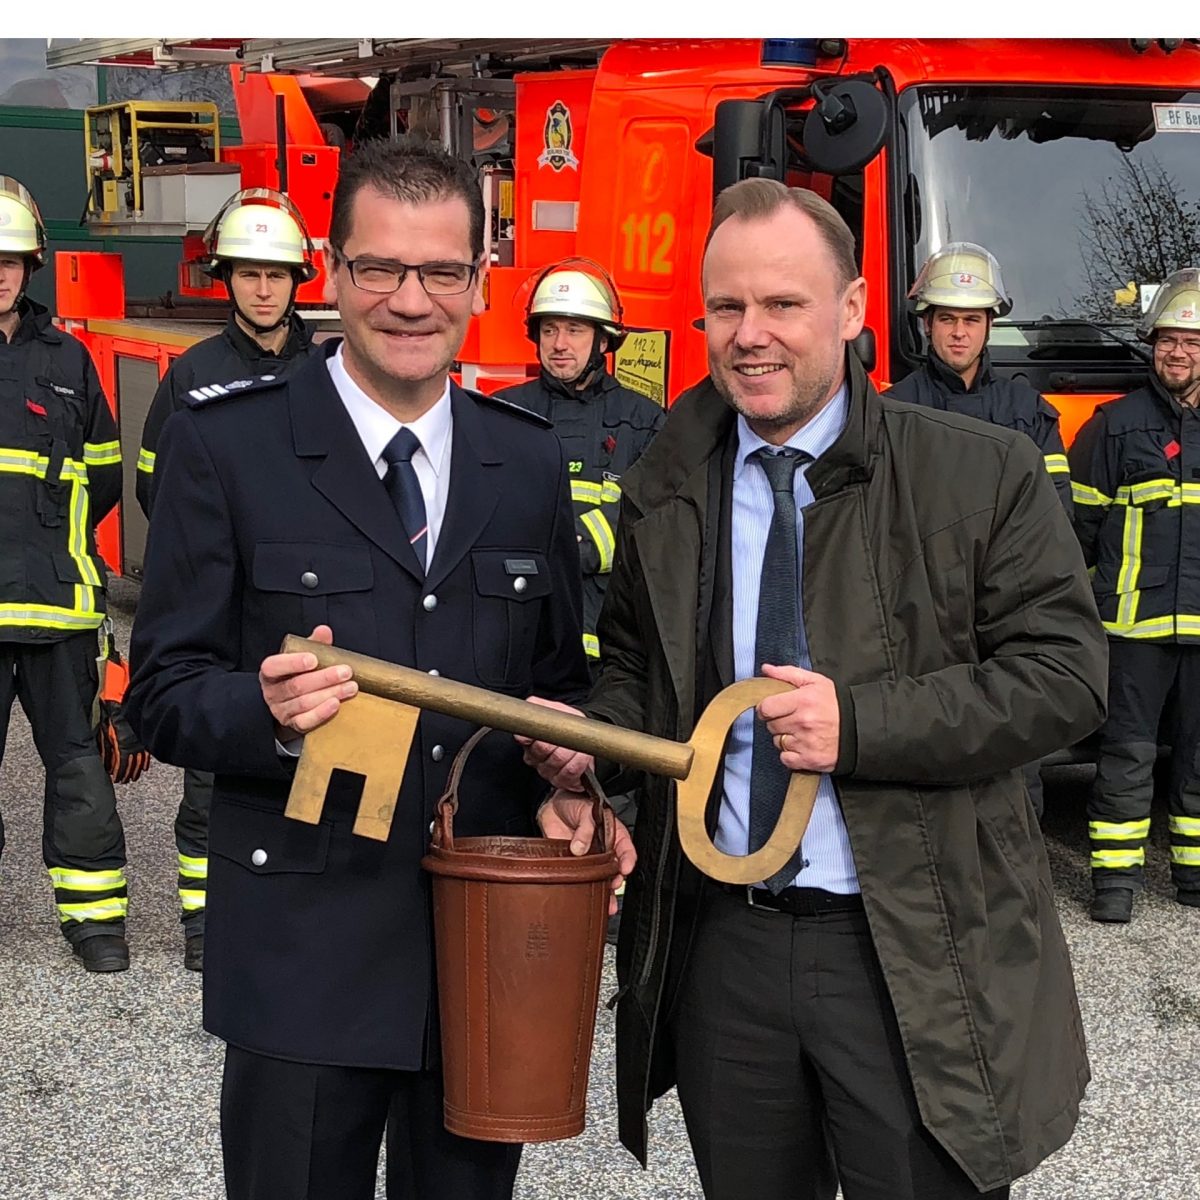 Dr. Christian Schwarz, the highest-ranking head official in Hamburg’s Fire Service